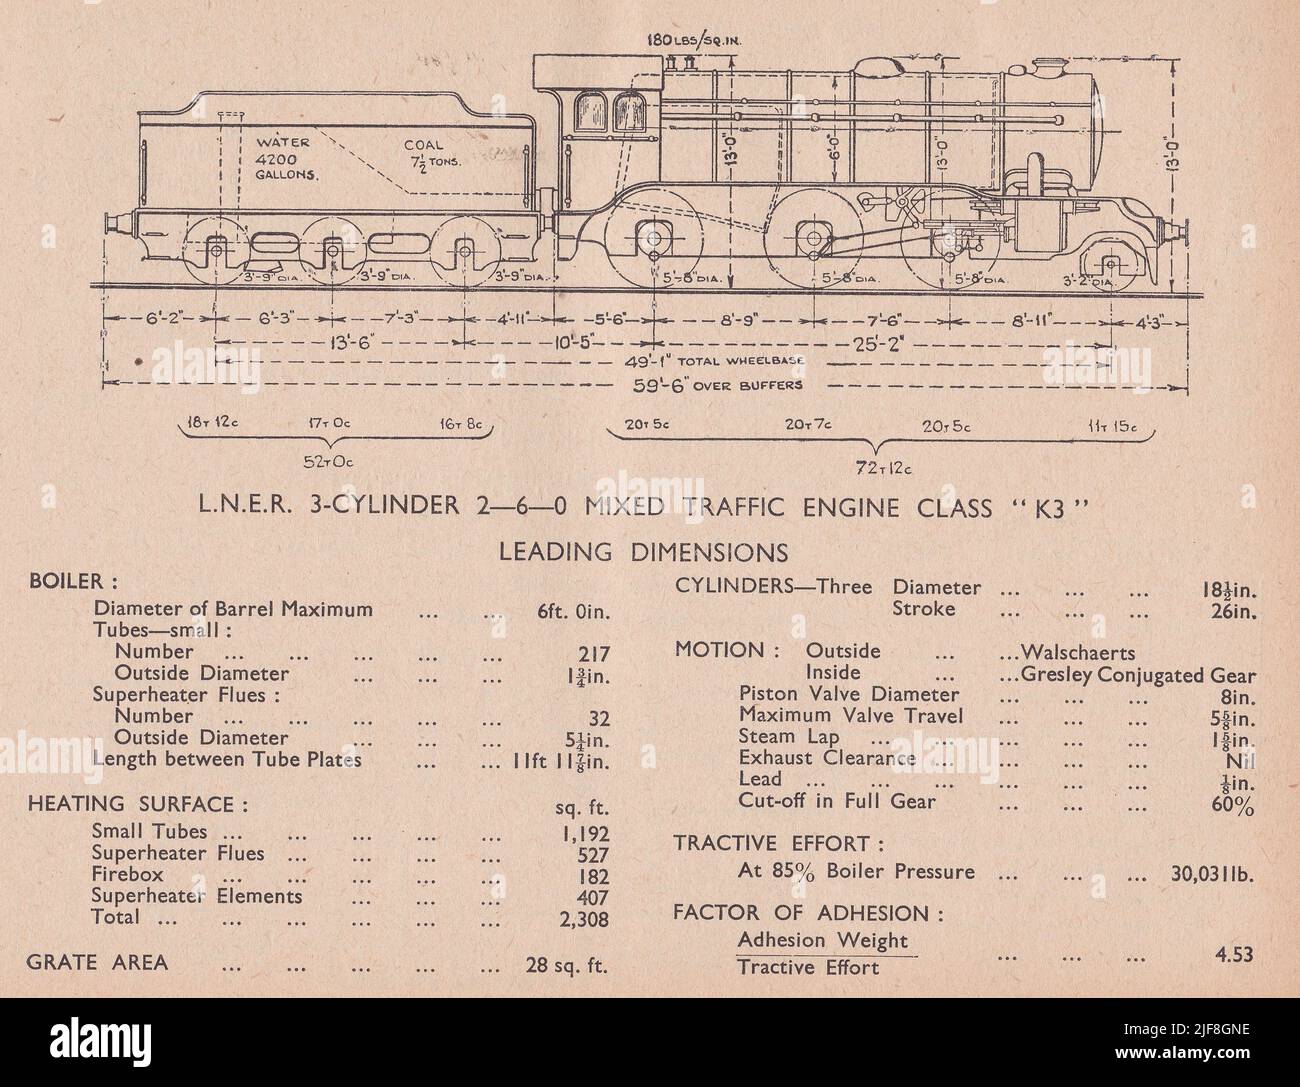 Vintage diagram L.N.E.R 3-Cylinder 2-6-0 Mixed Traffic Engine Class K3 Leading Dimensions. Stock Photo